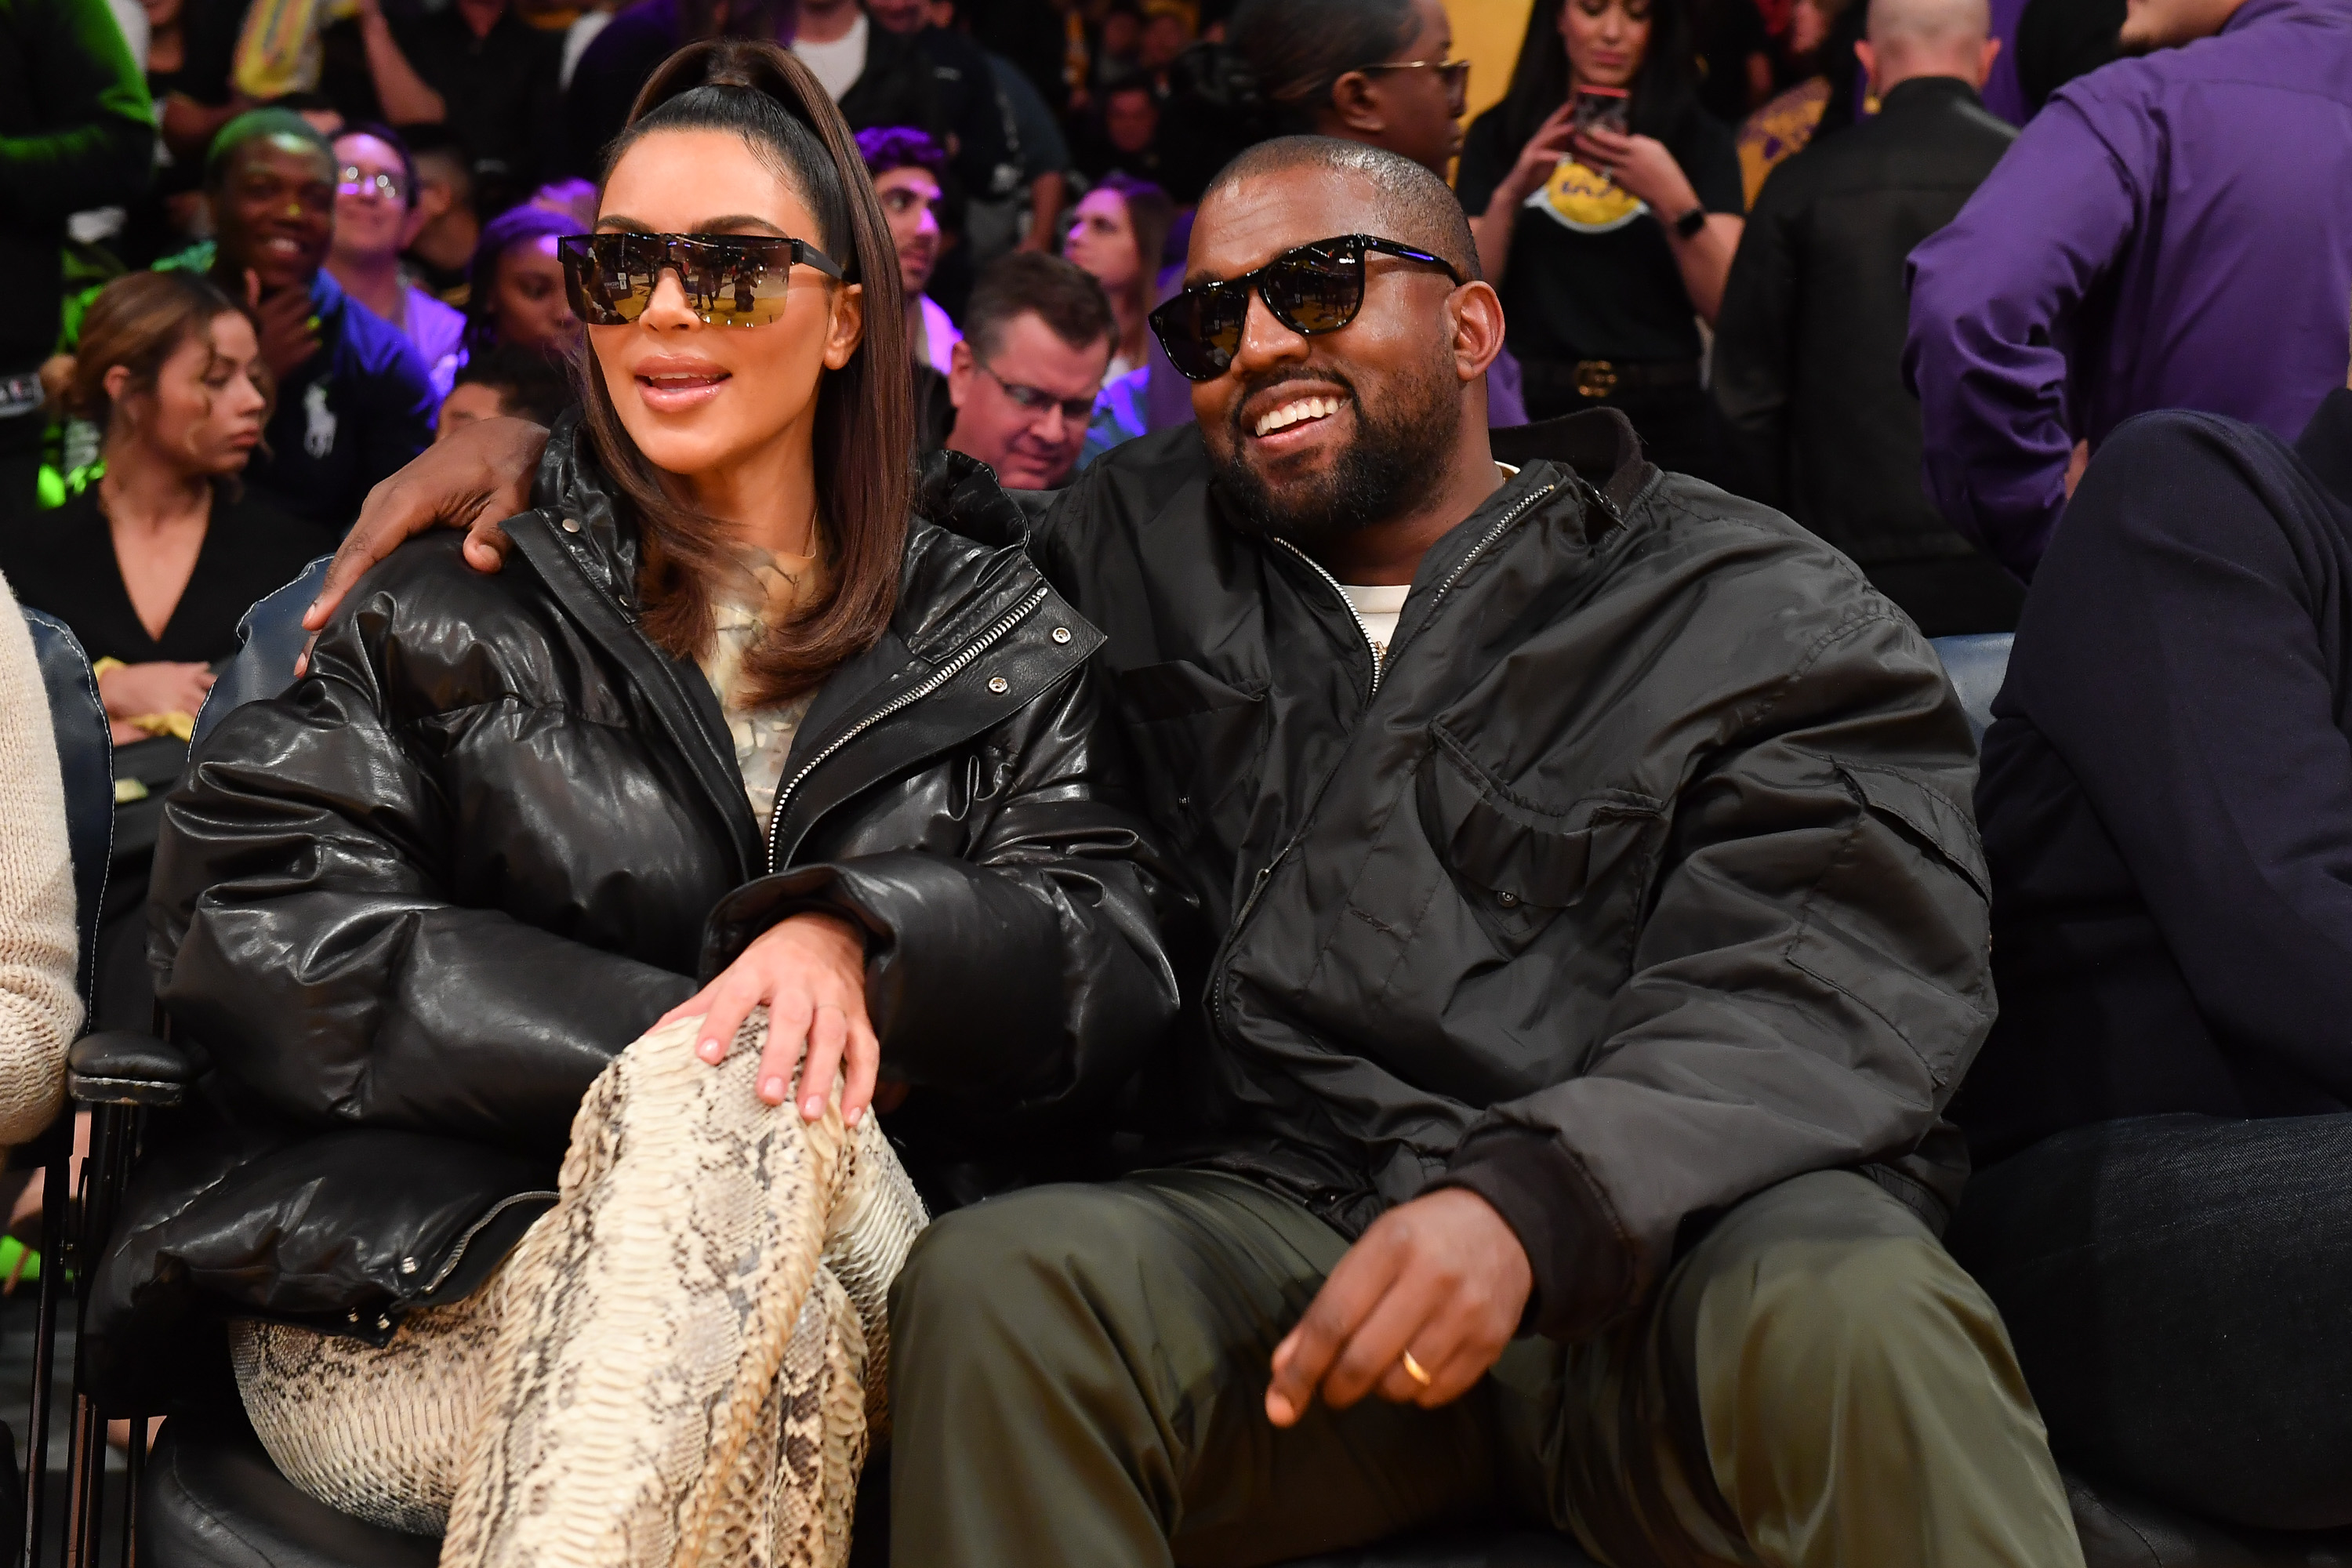 Kim and Ye sitting together and smiling at a sports event